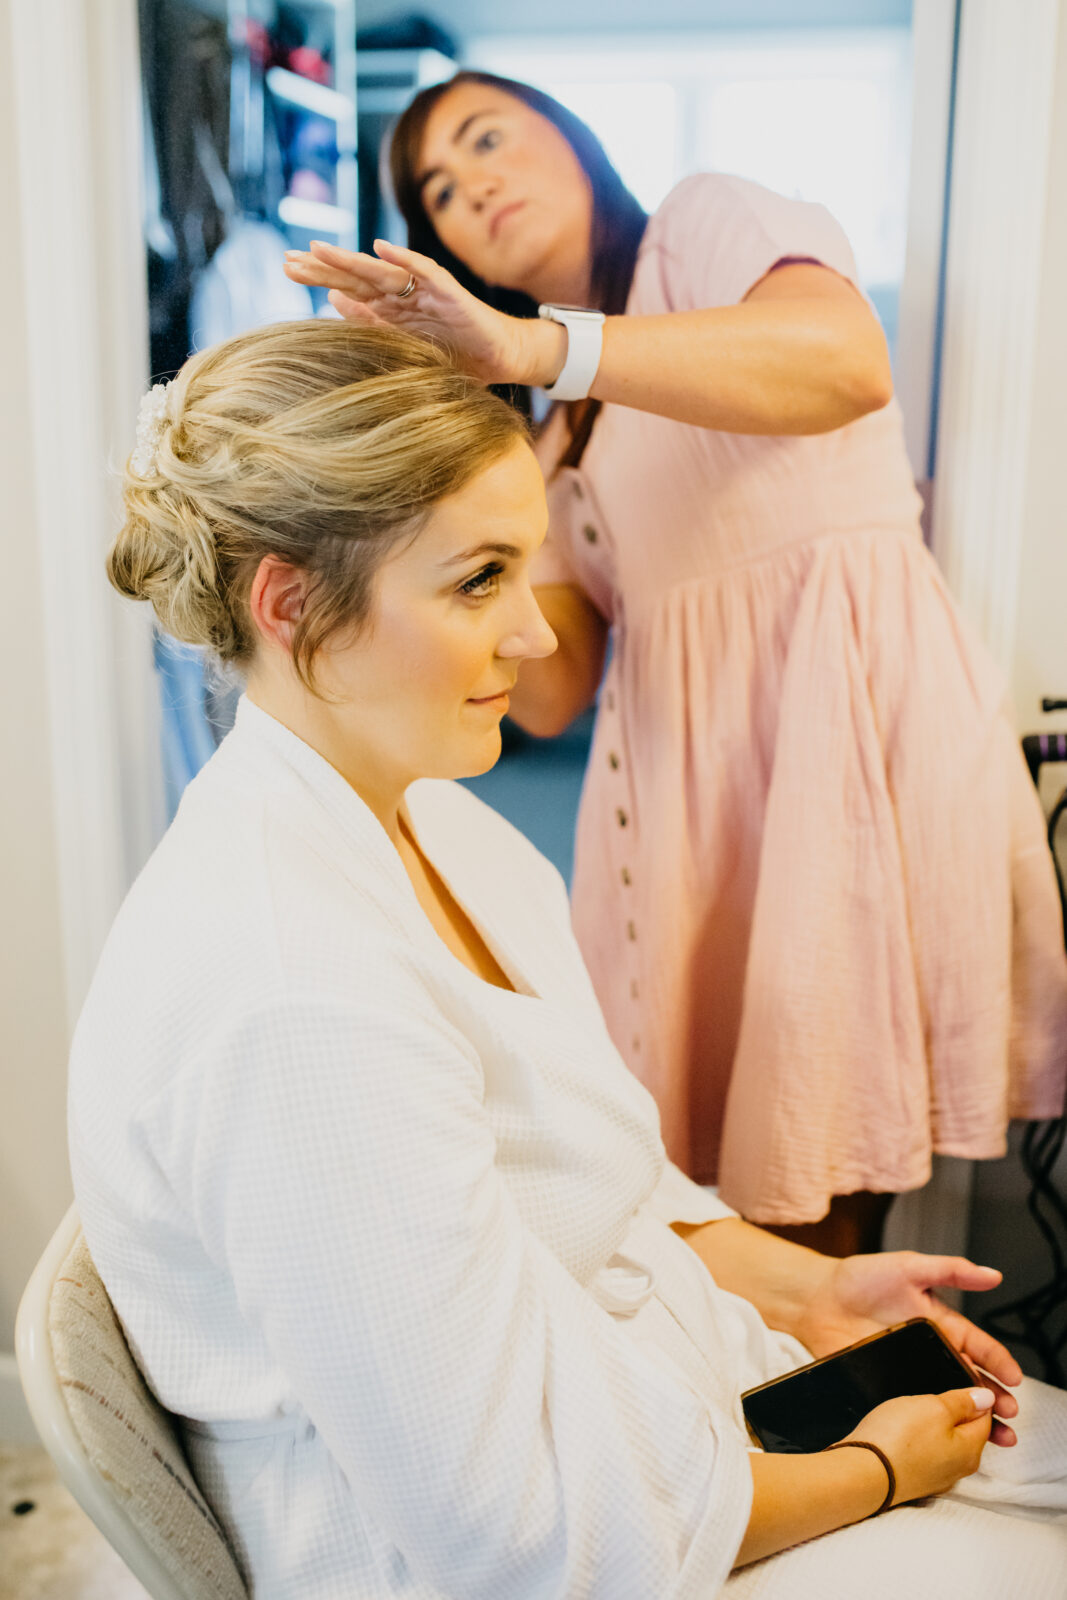 A photo of the bride with her hair stylist during the preparation of her wedding day